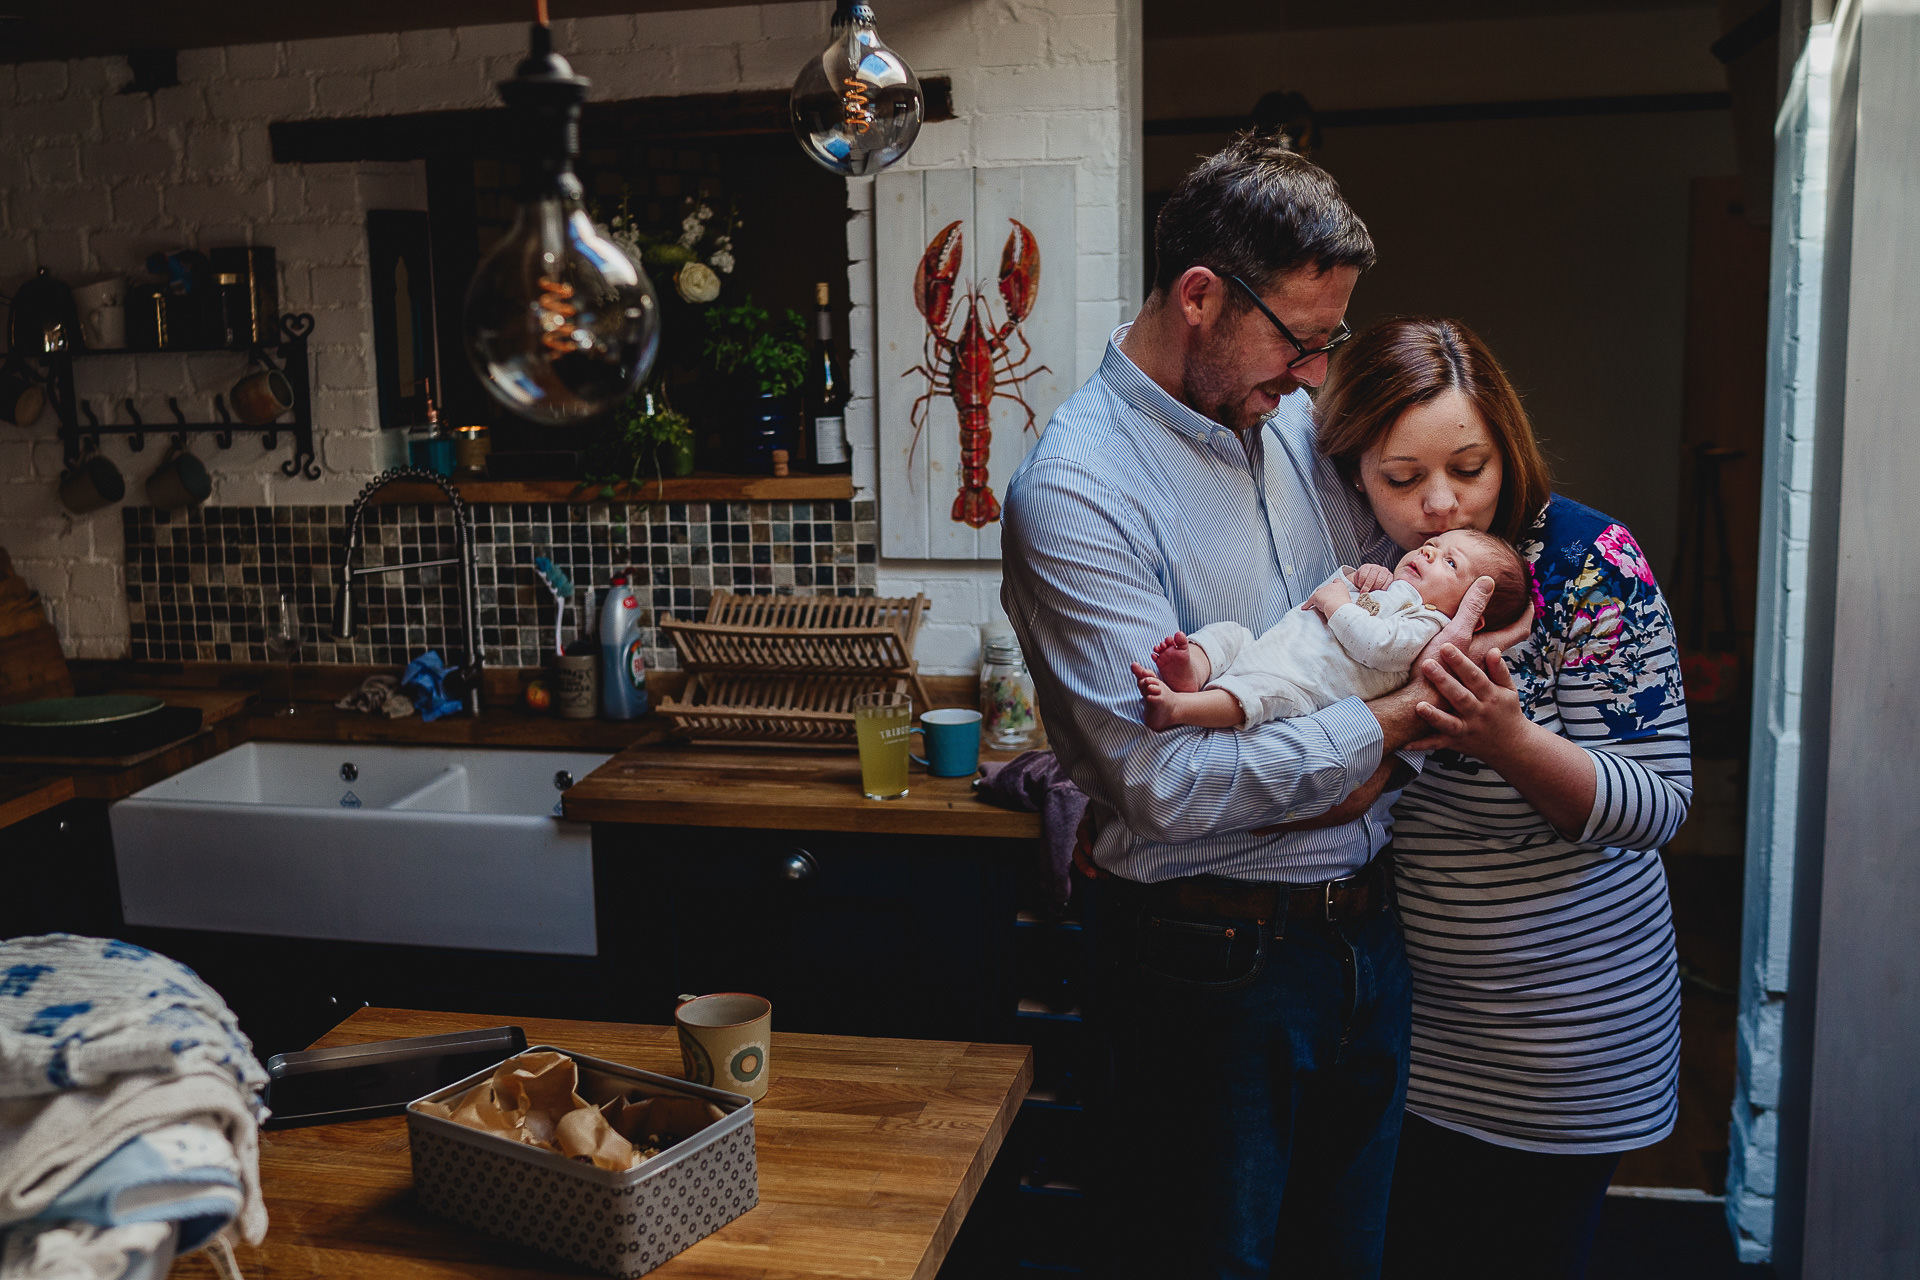 Parents cuddling and kissing a newborn at home in their kitchen